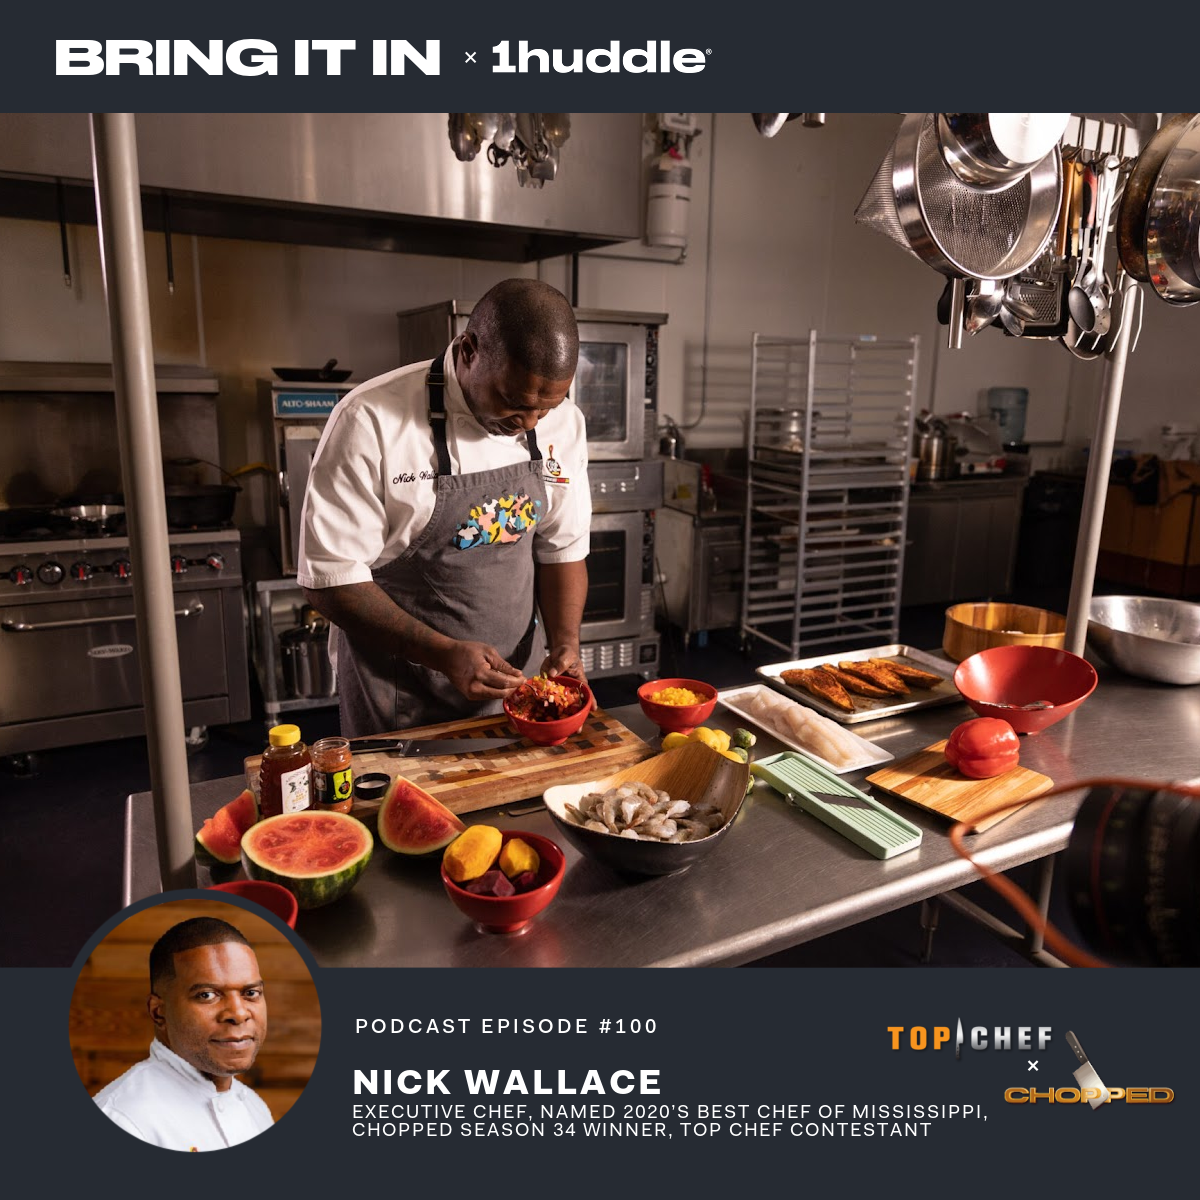 Nick Wallace, Executive Chef, Named 2020’s Best Chef of Mississippi, Chopped Season 34 Winner, Top Chef Contestant